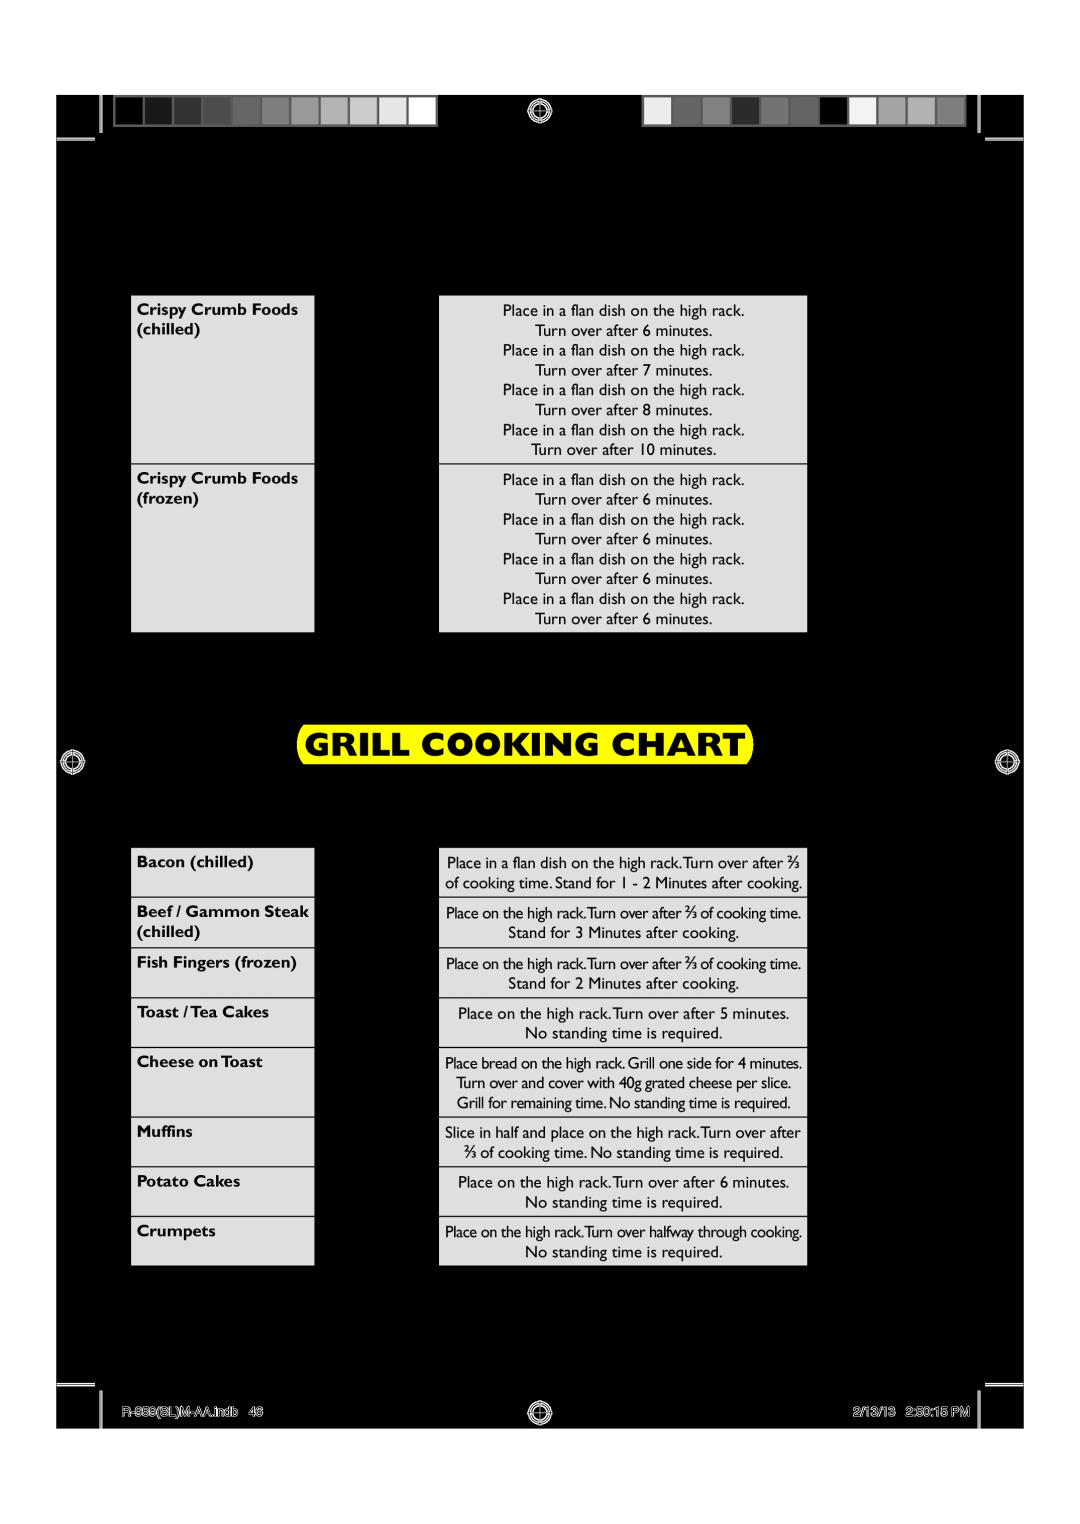 Sharp R-959(SL)M-AA Dual Grill Cooking Chart, Food, Method, Time, Mode, Bacon chilled, Fish Fingers frozen 